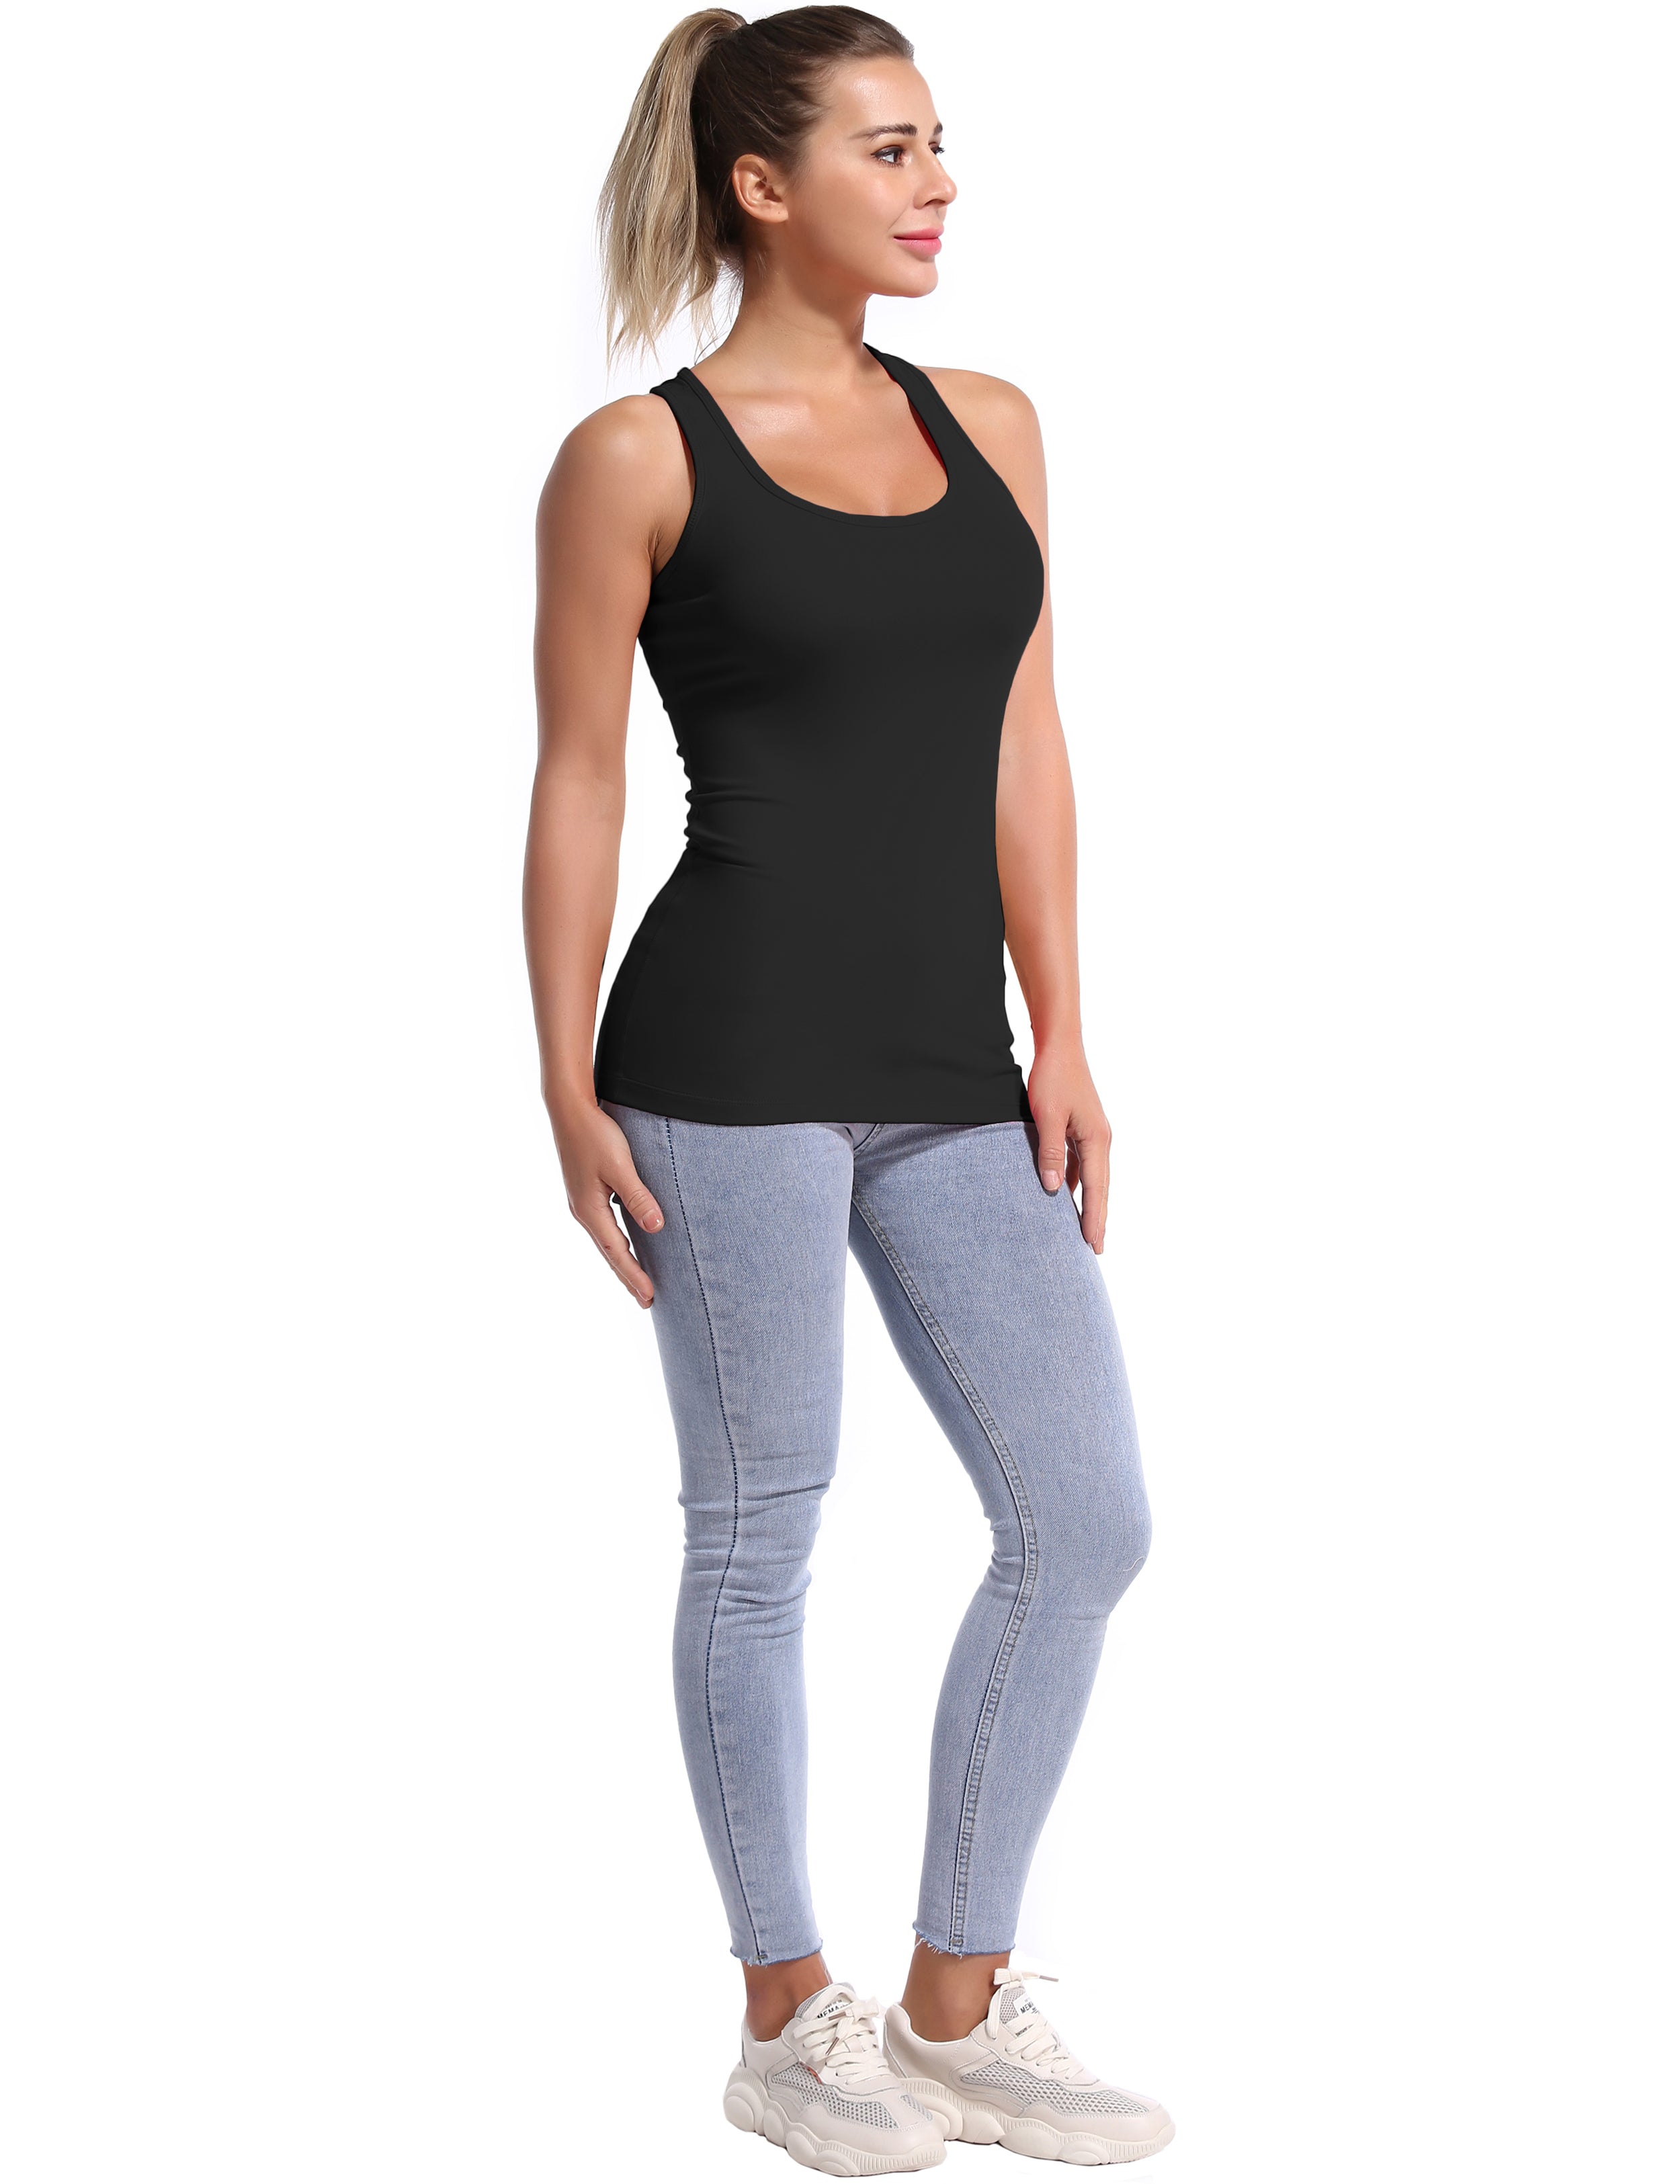 Racerback Athletic Tank Tops black 92%Nylon/8%Spandex(Cotton Soft) Designed for Yoga Tight Fit So buttery soft, it feels weightless Sweat-wicking Four-way stretch Breathable Contours your body Sits below the waistband for moderate, everyday coverage